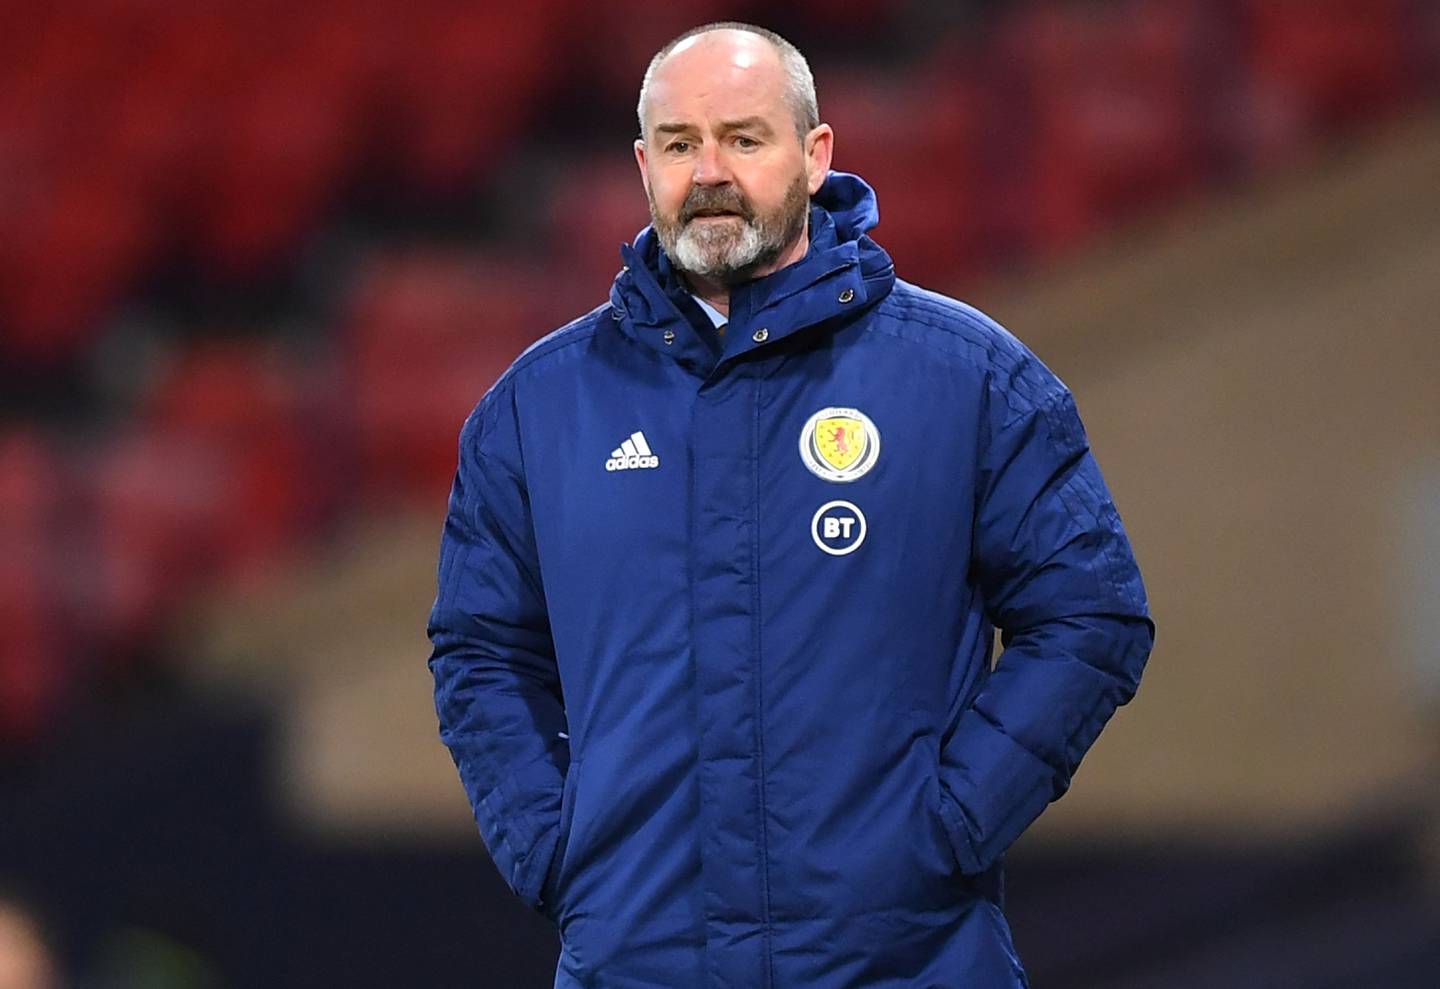 (FILES) In this file photo taken on March 31, 2021 Scotland's head coach Steve Clarke watches his players from the touchline during the FIFA World Cup Qatar 2022 Group F qualification football match between Scotland and Faroe Islands at Hampden Park in Glasgow. (Photo by ANDY BUCHANAN / AFP)